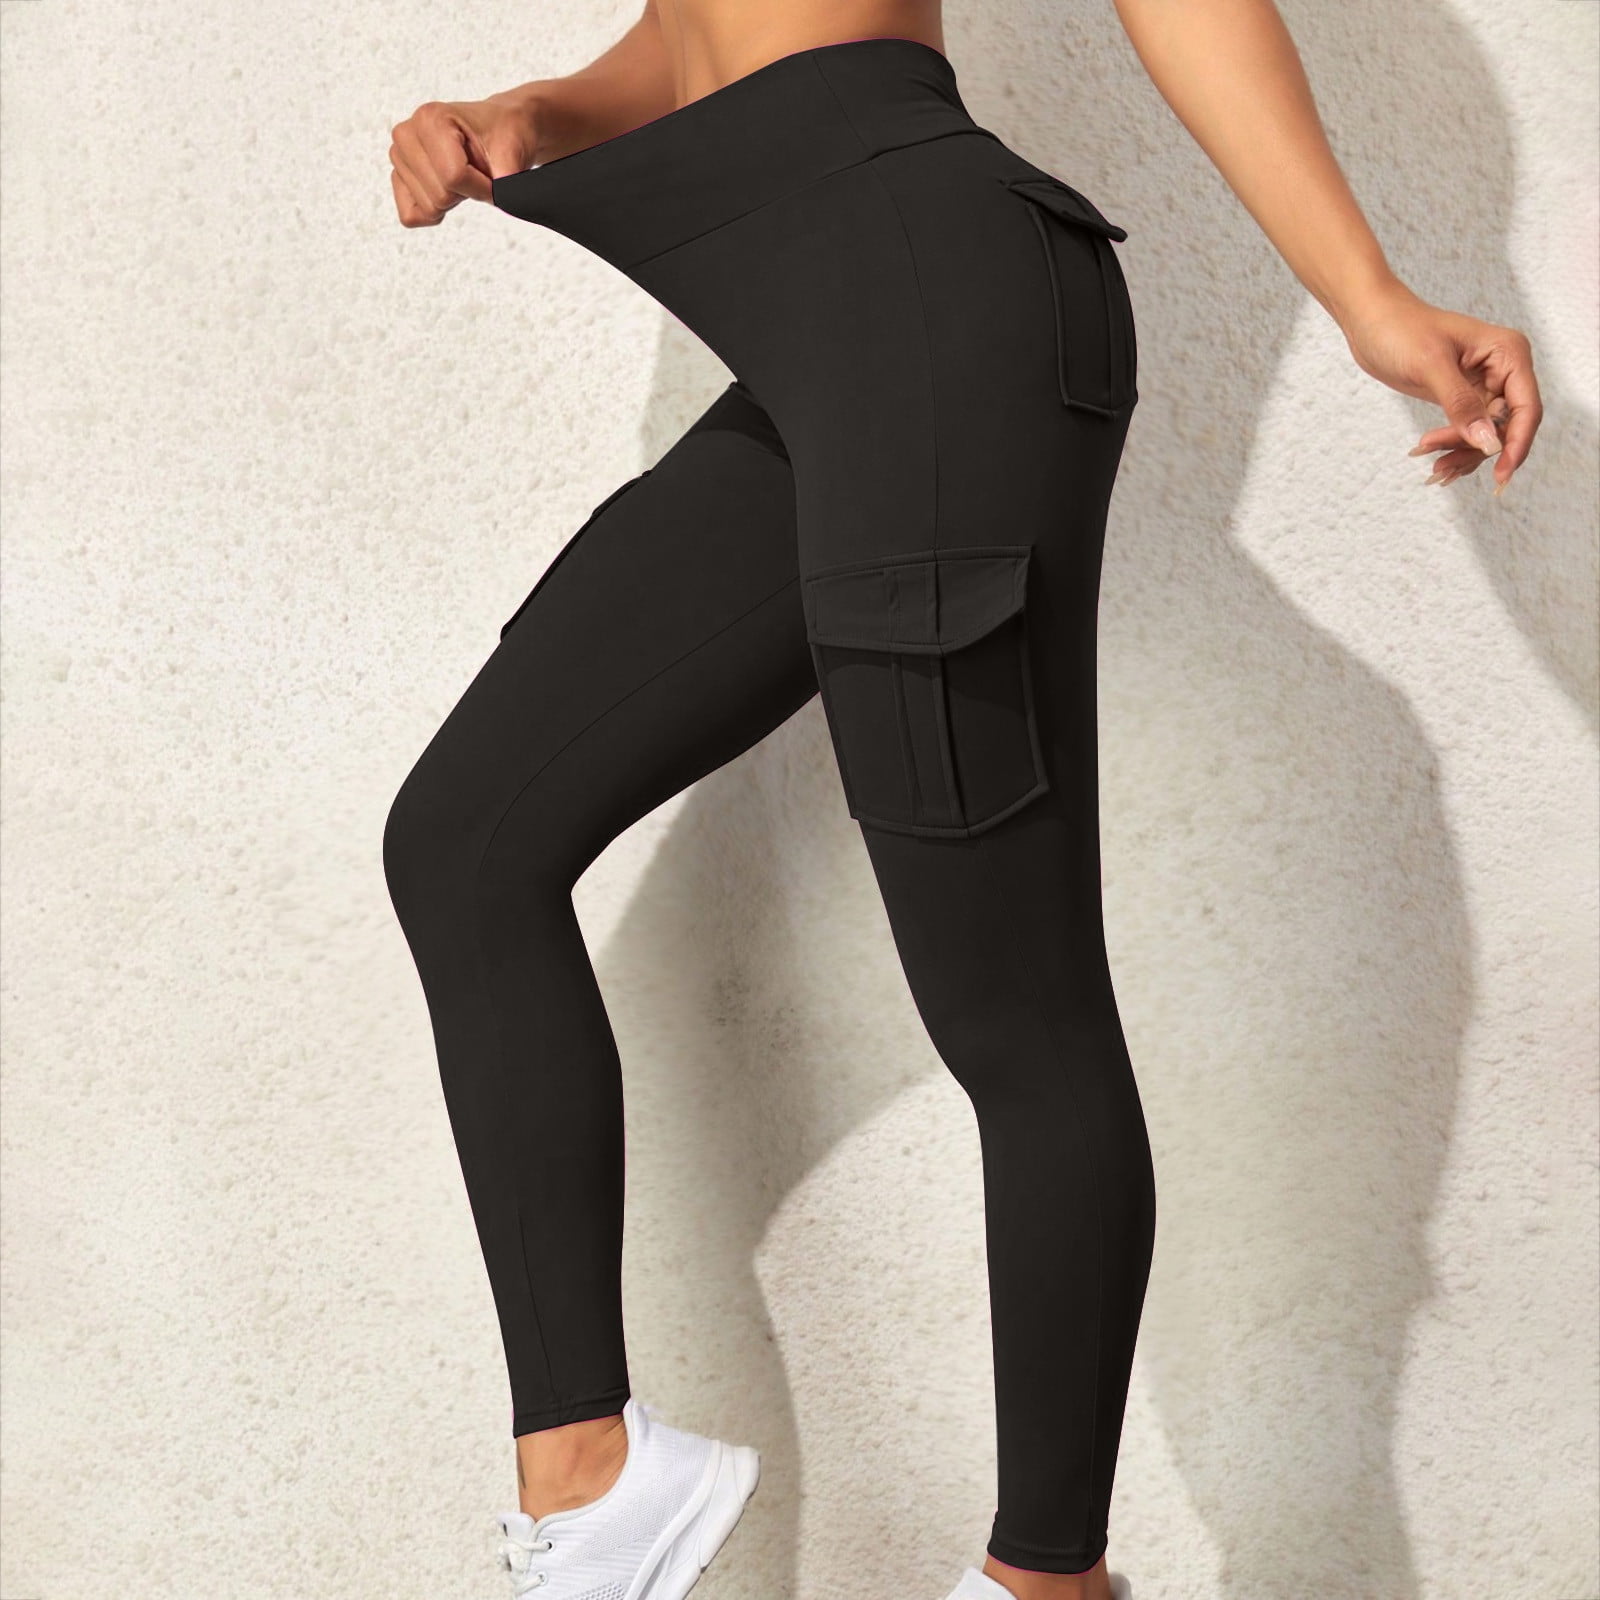 Update more than 204 exercise leggings with pockets